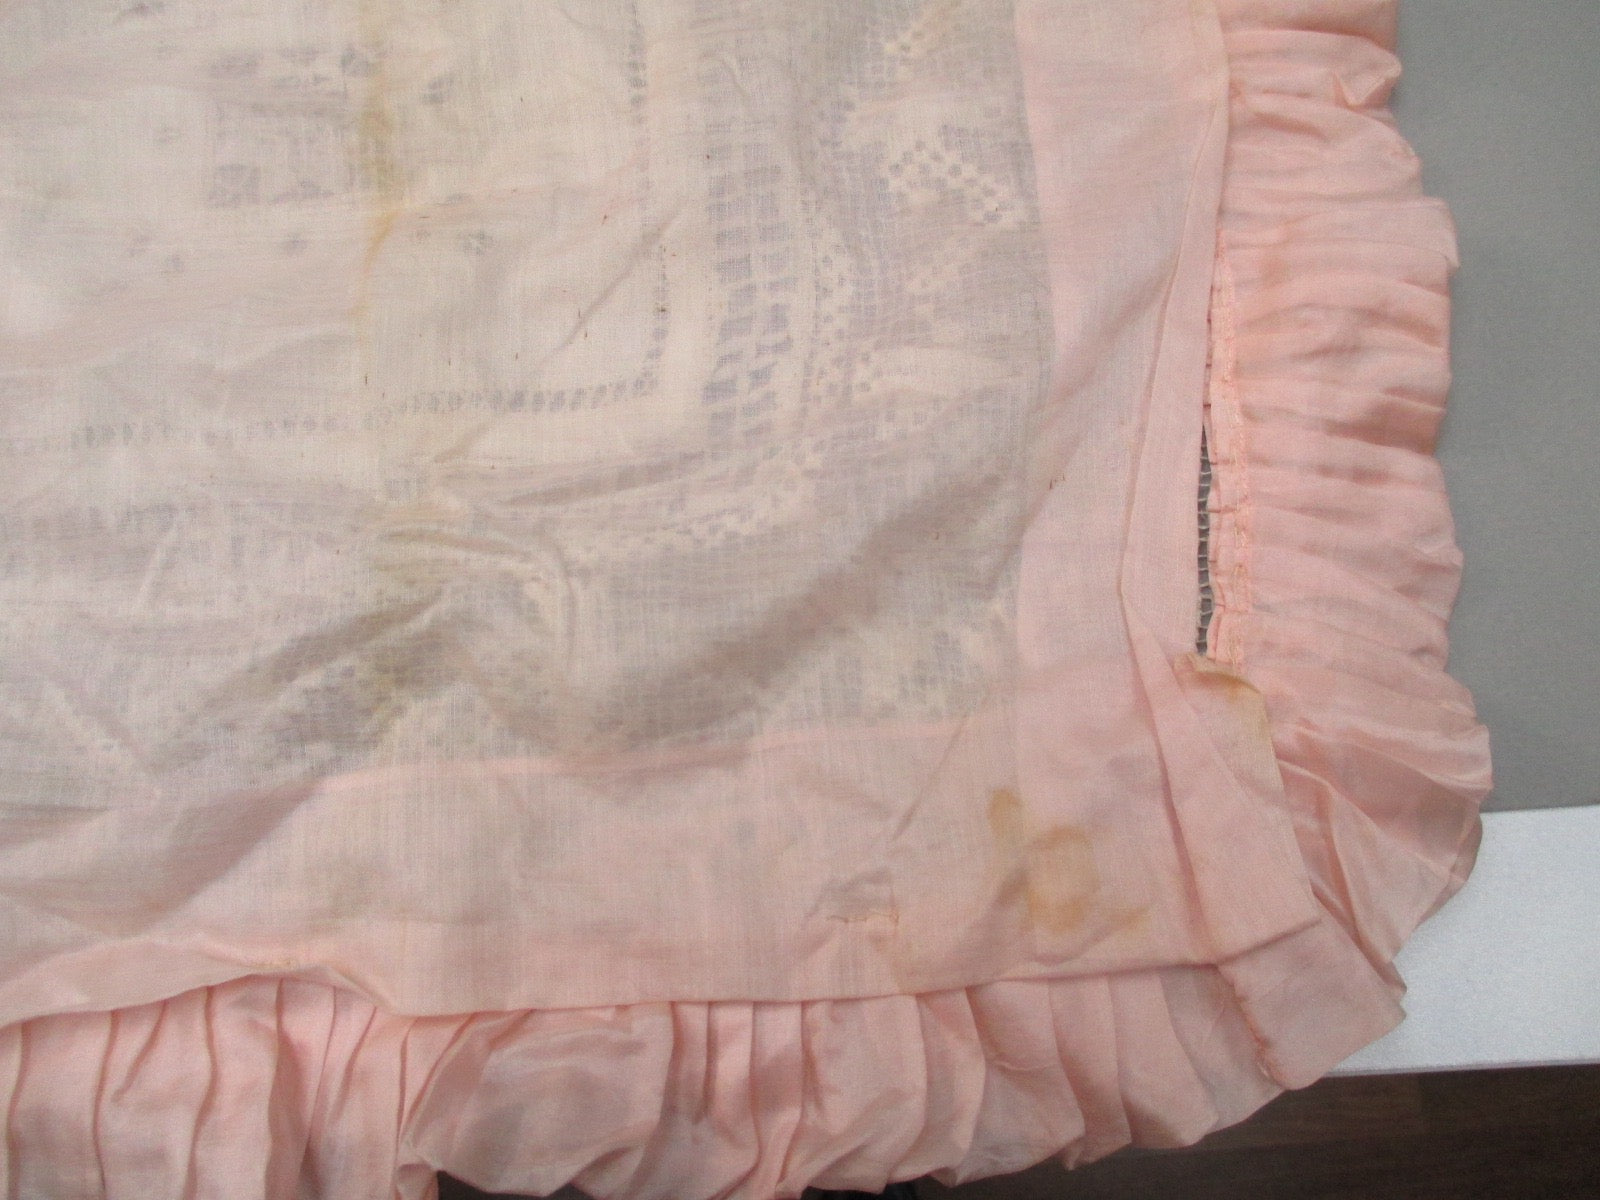 Antique Victorian baby coverlet